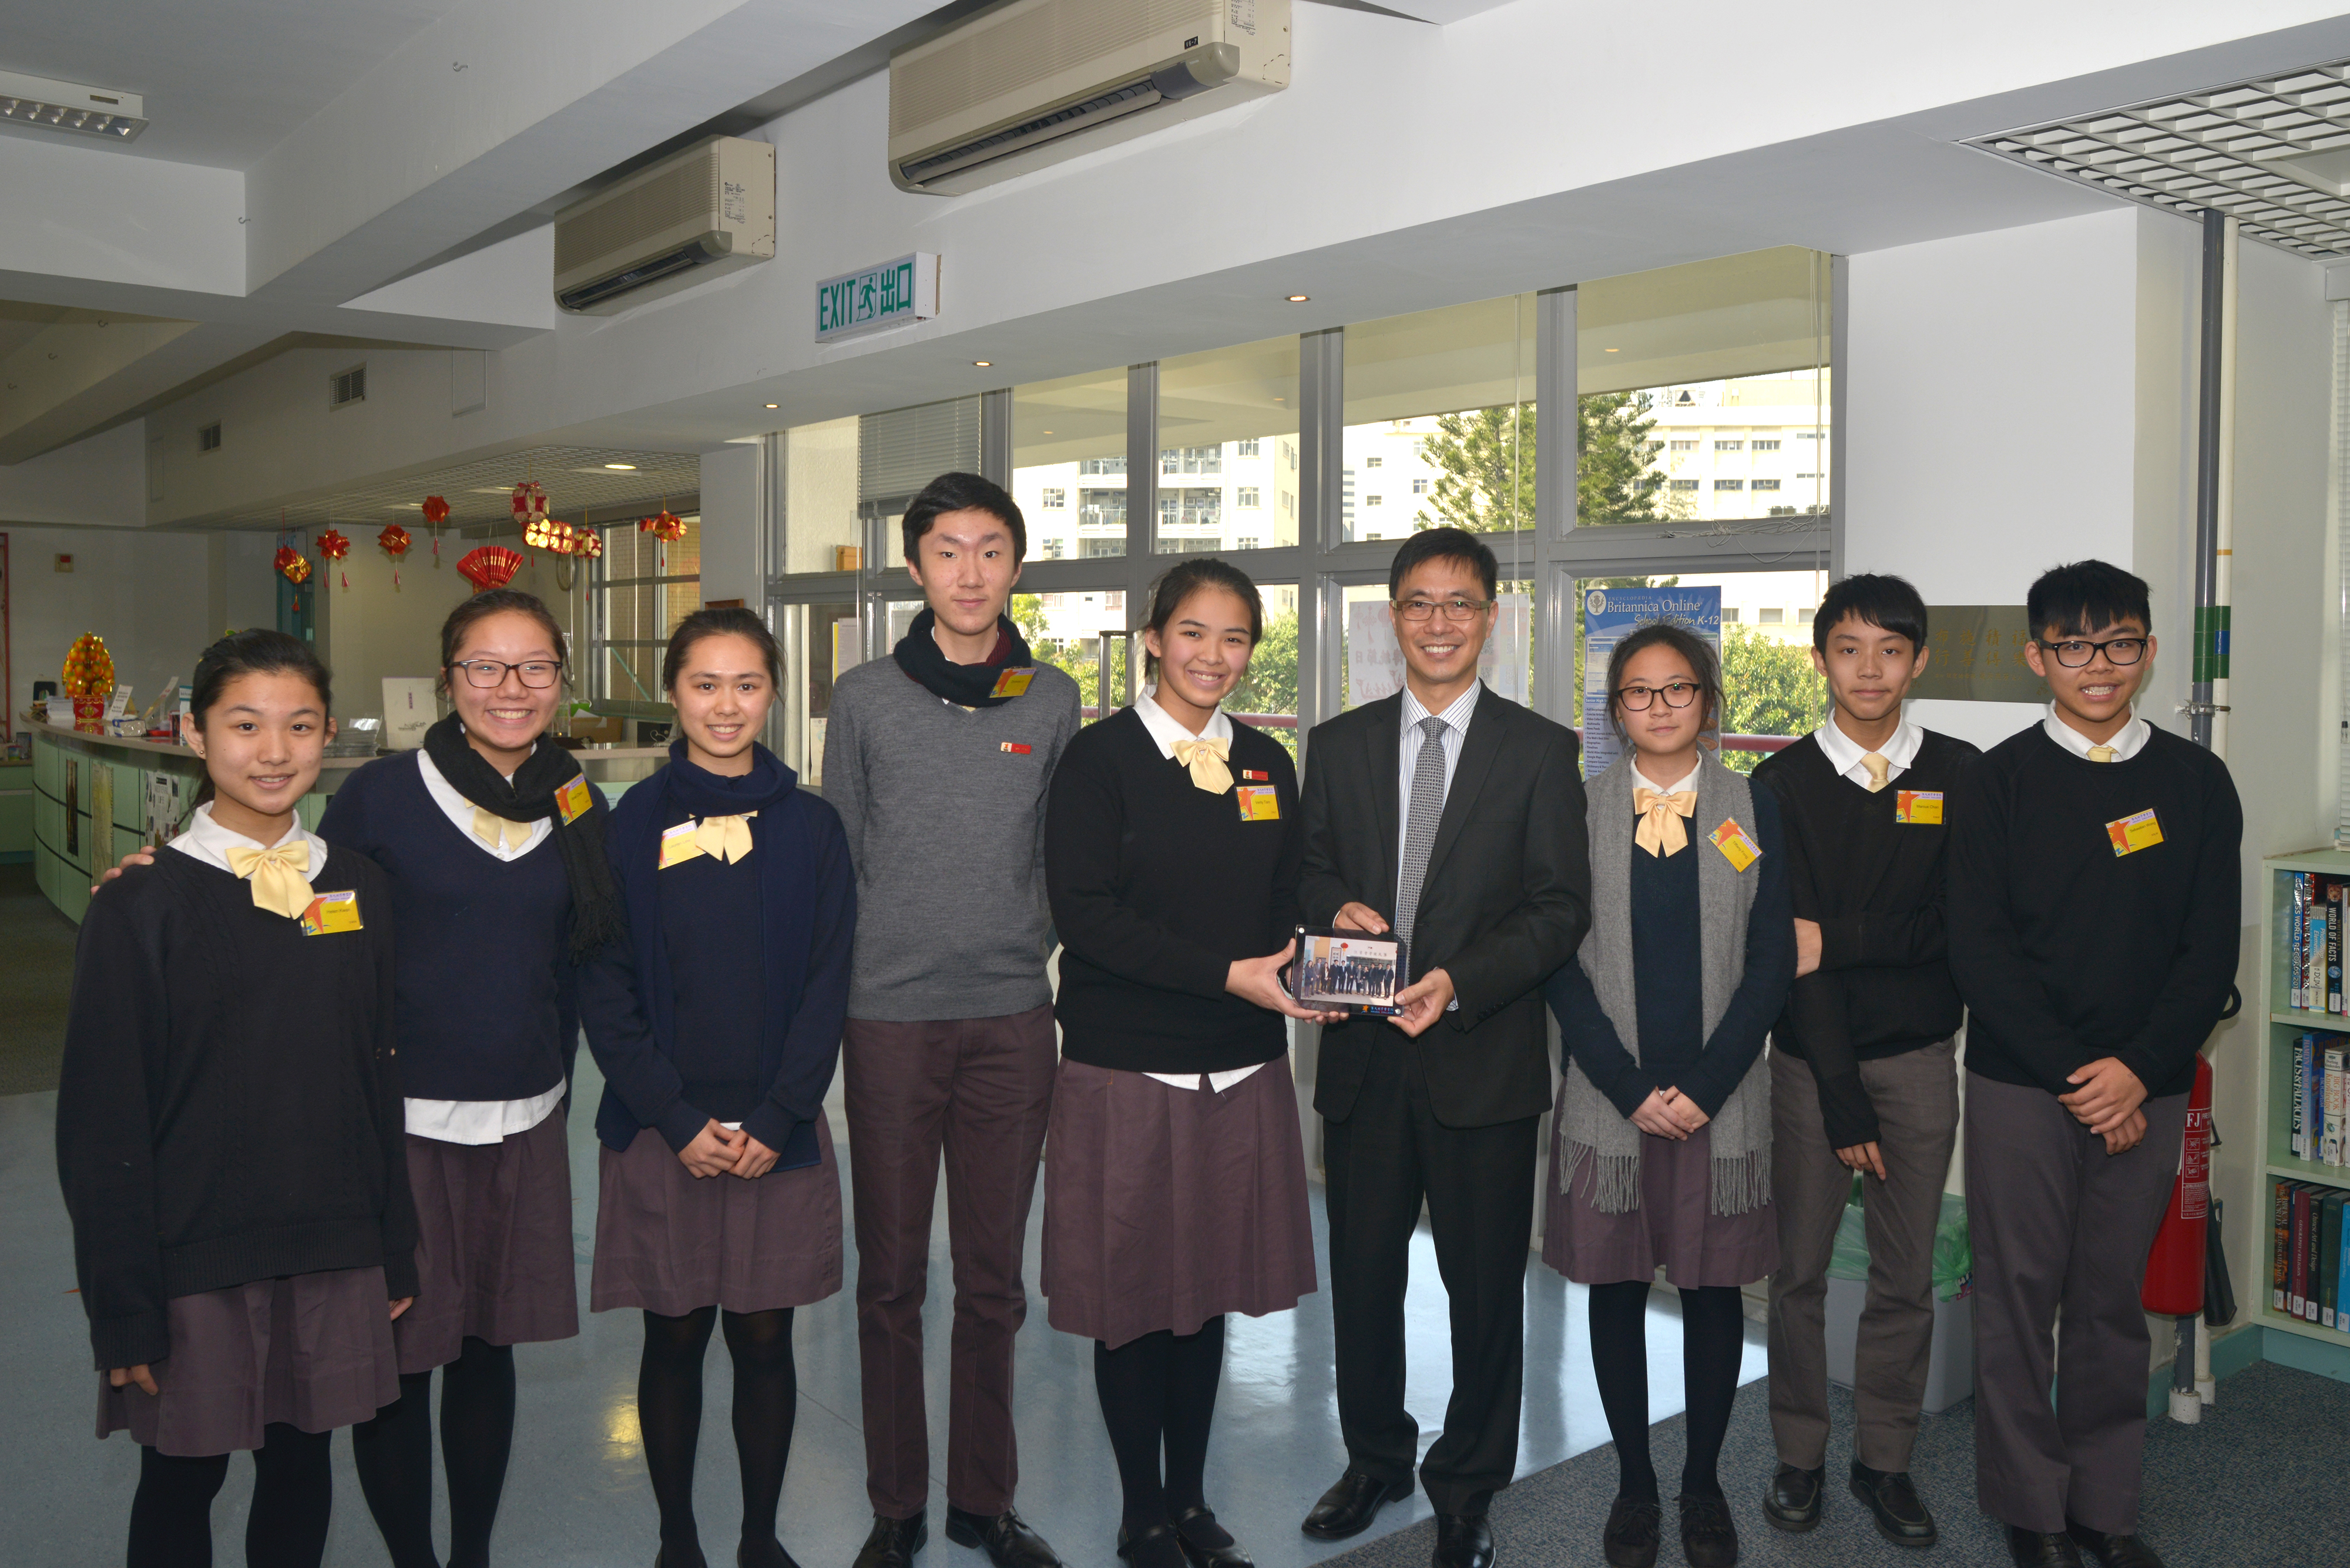 Students presented a souvenir to Mr. Yeung